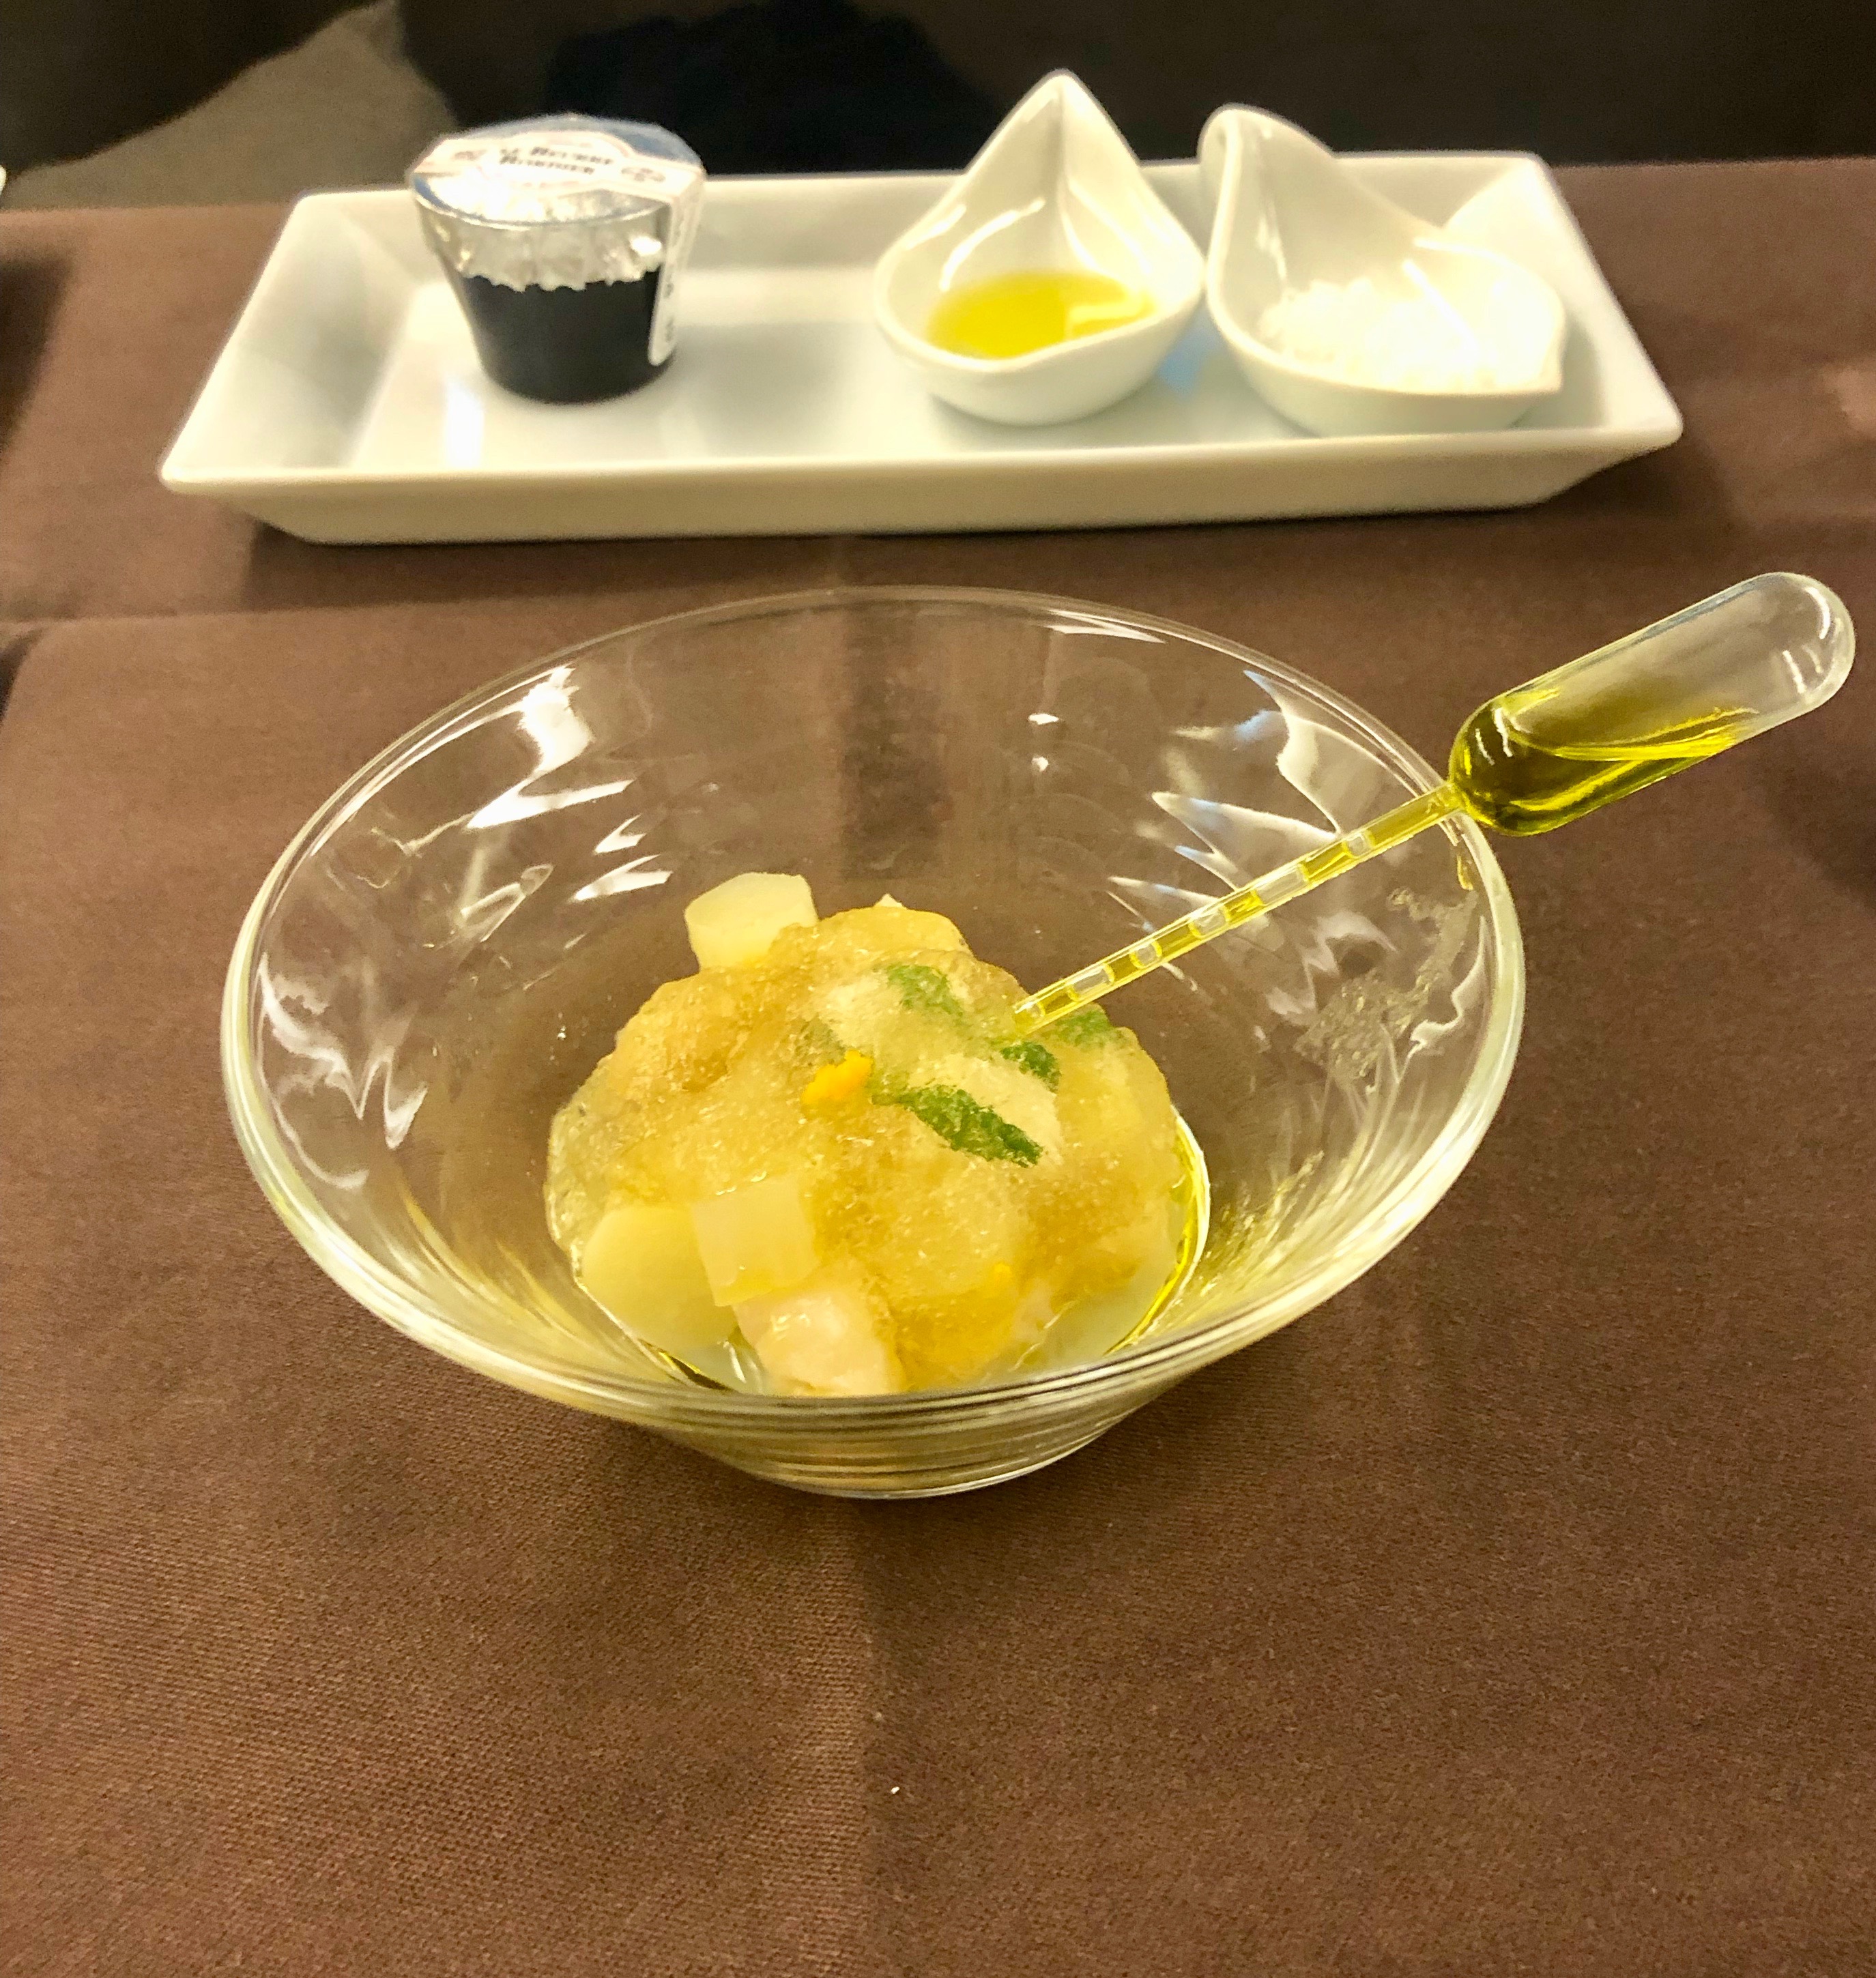 JAL First Class amuse bouche - a tartare of pen shell, scallop, bamboo shoots and white asparagus